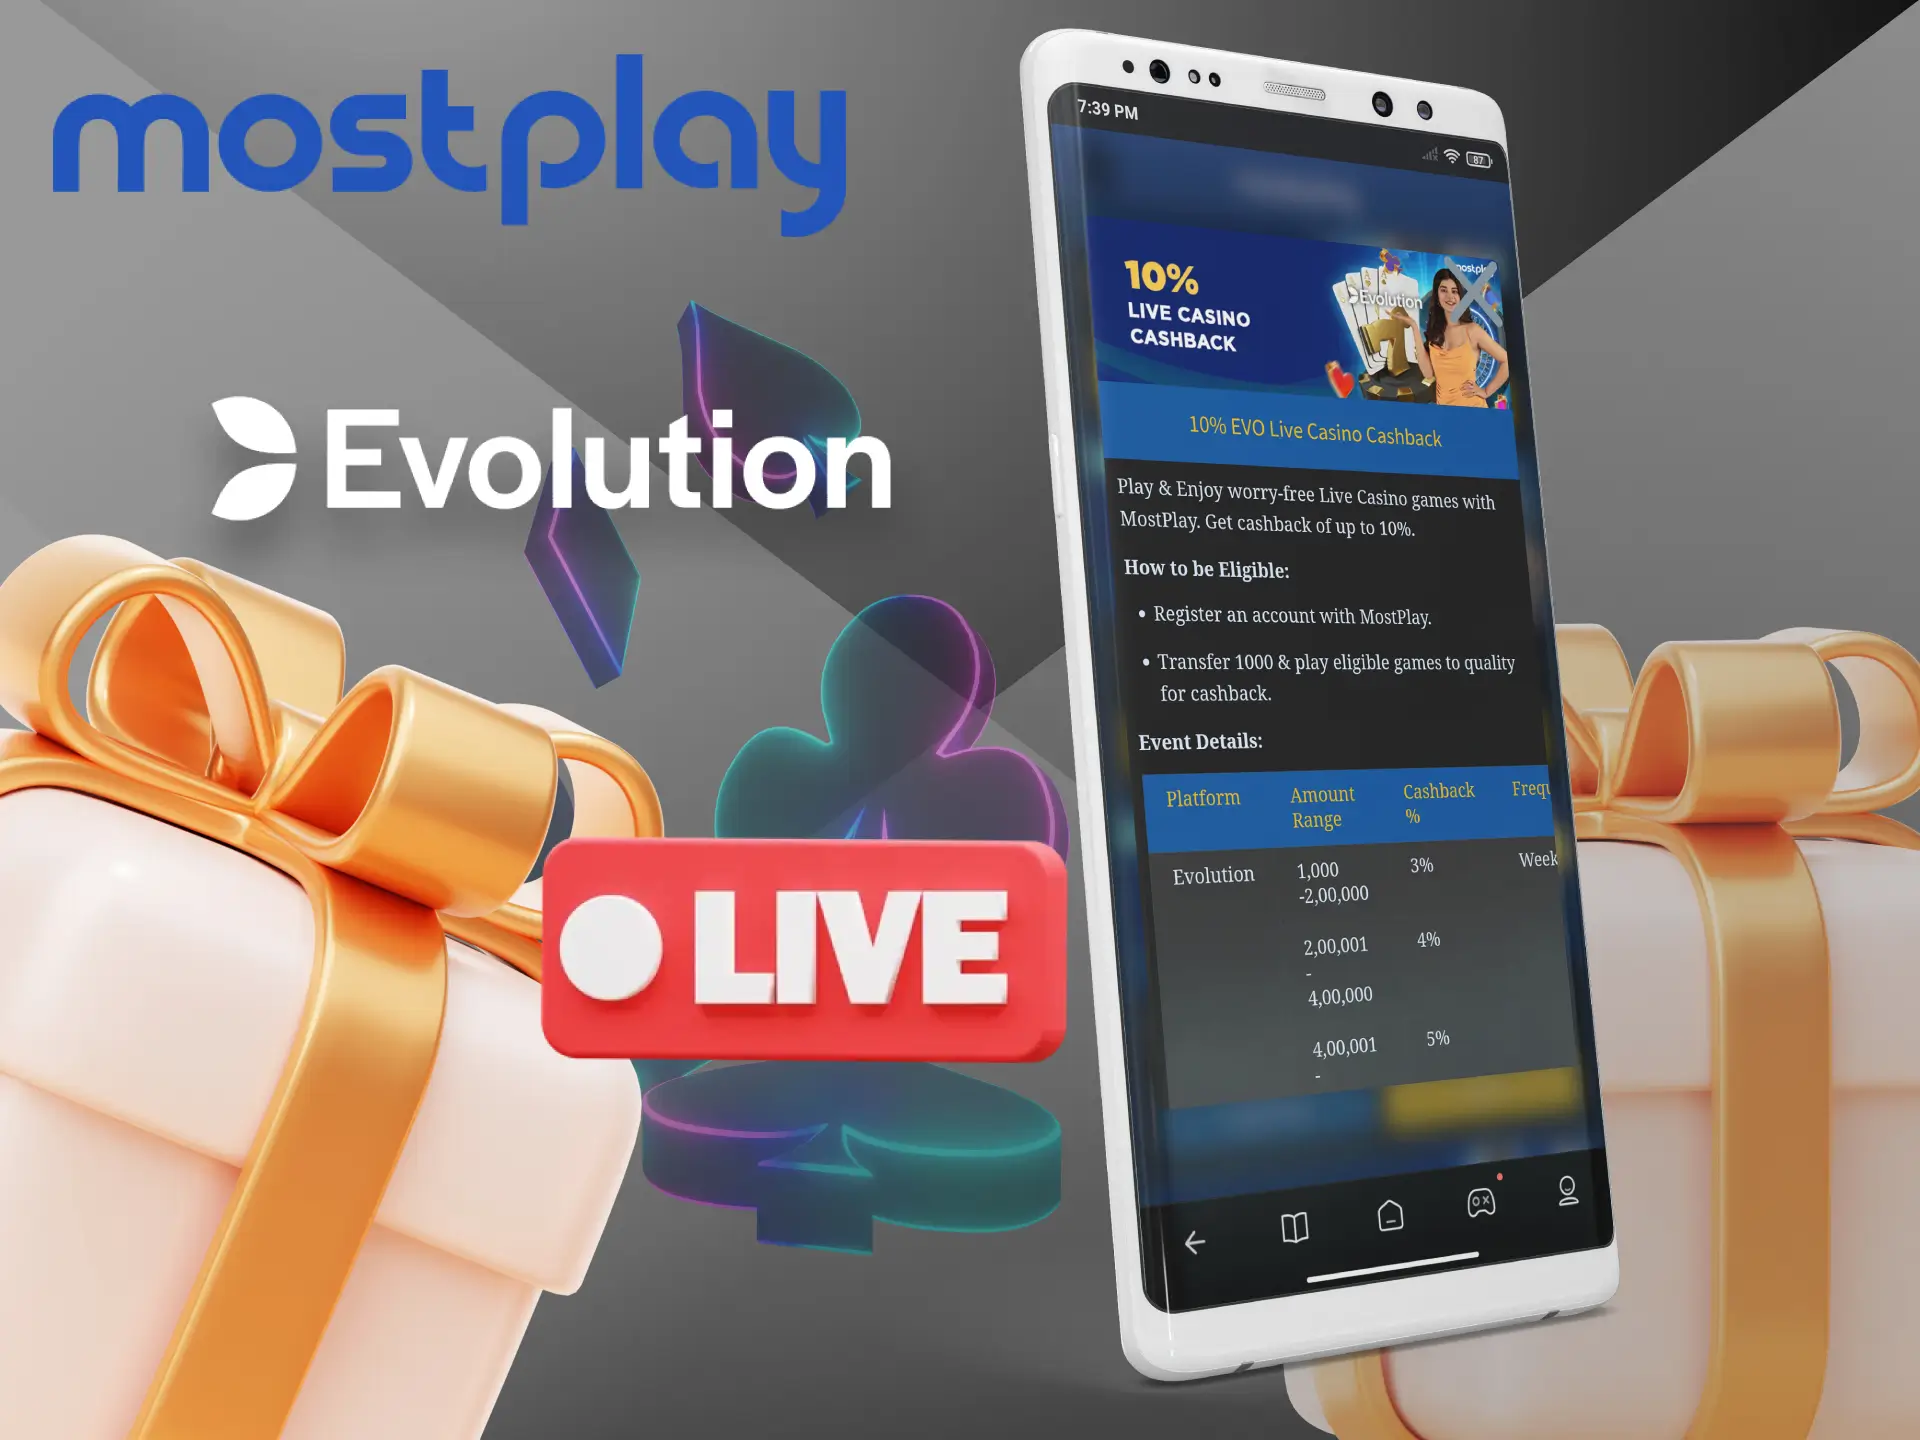 Play games from popular provider Evo and receive regular cashback from Mostplay Casino.